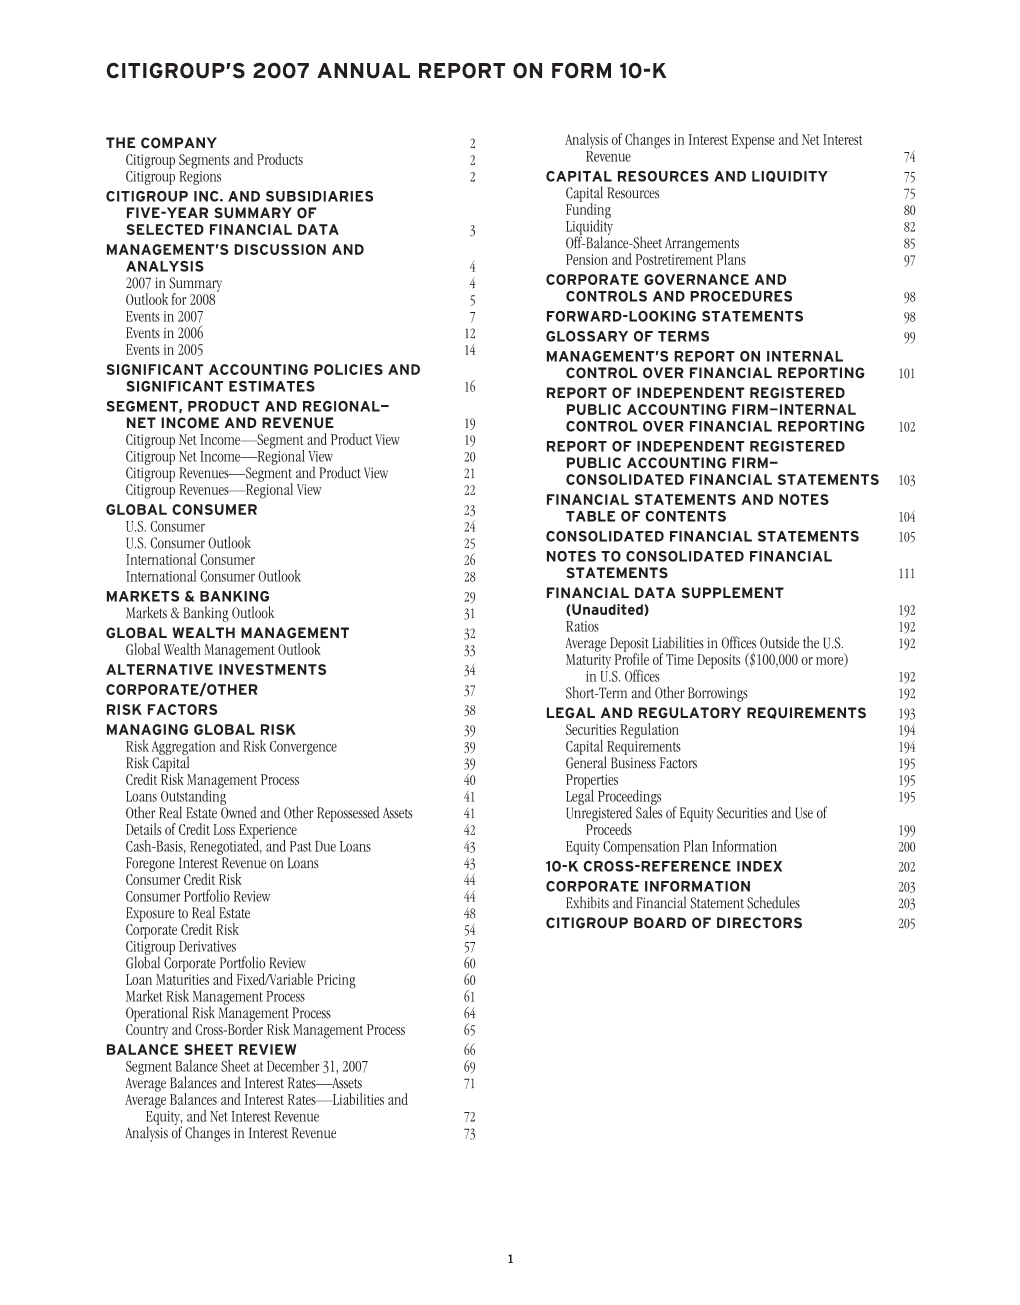 Citigroup's 2007 Annual Report on Form 10-K